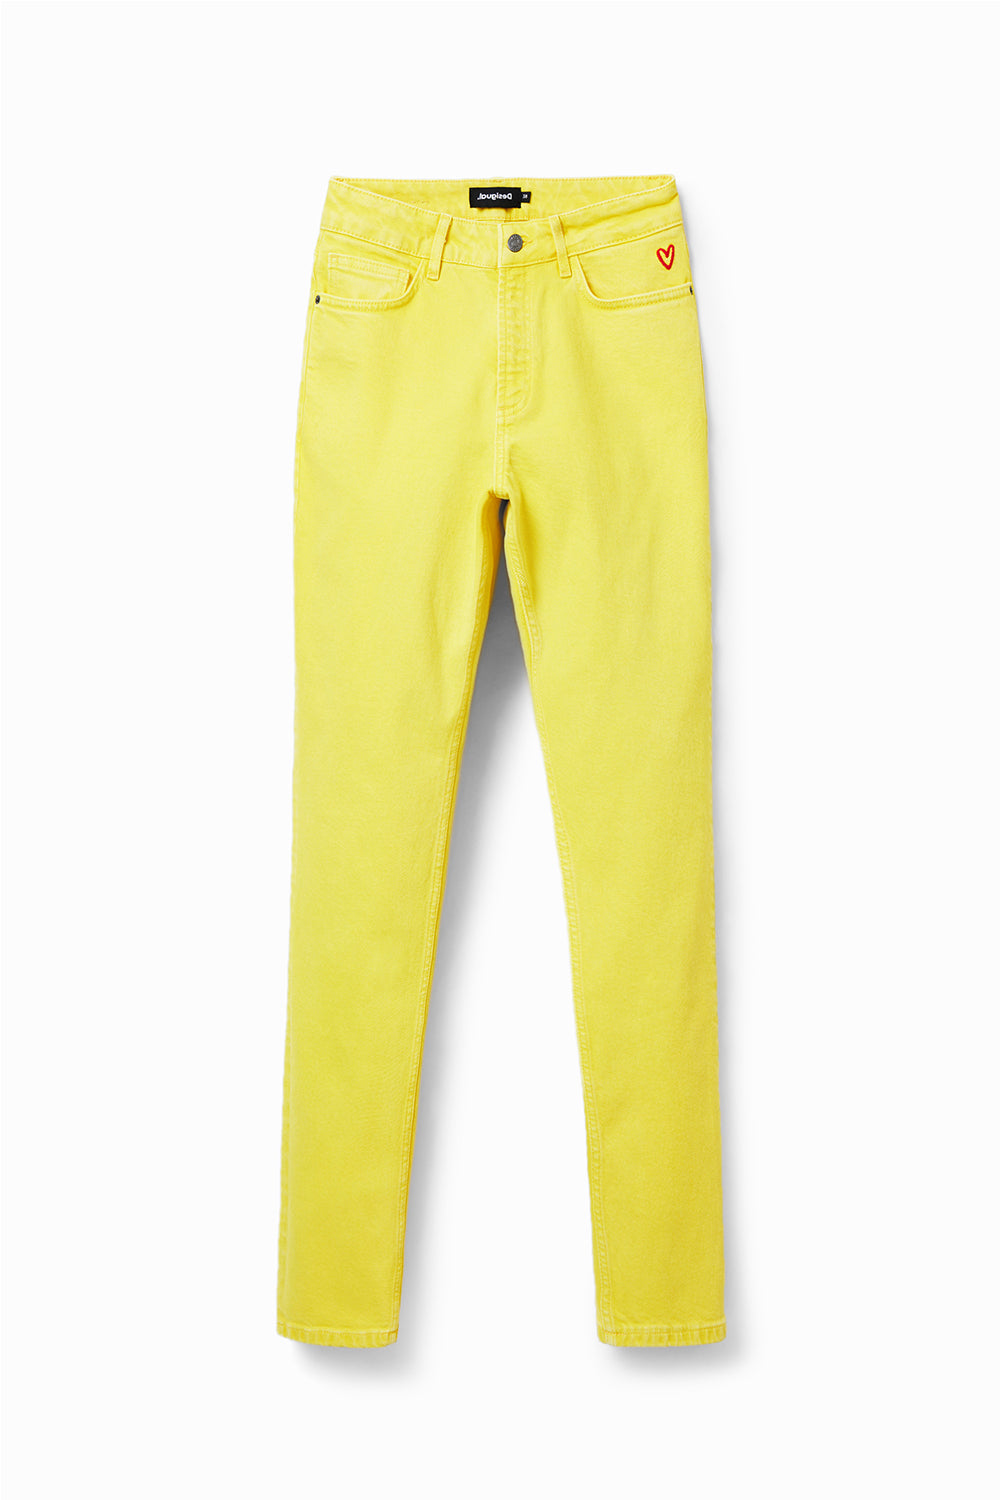 Desigual Mid-Rise Straight Jeans  Yellow